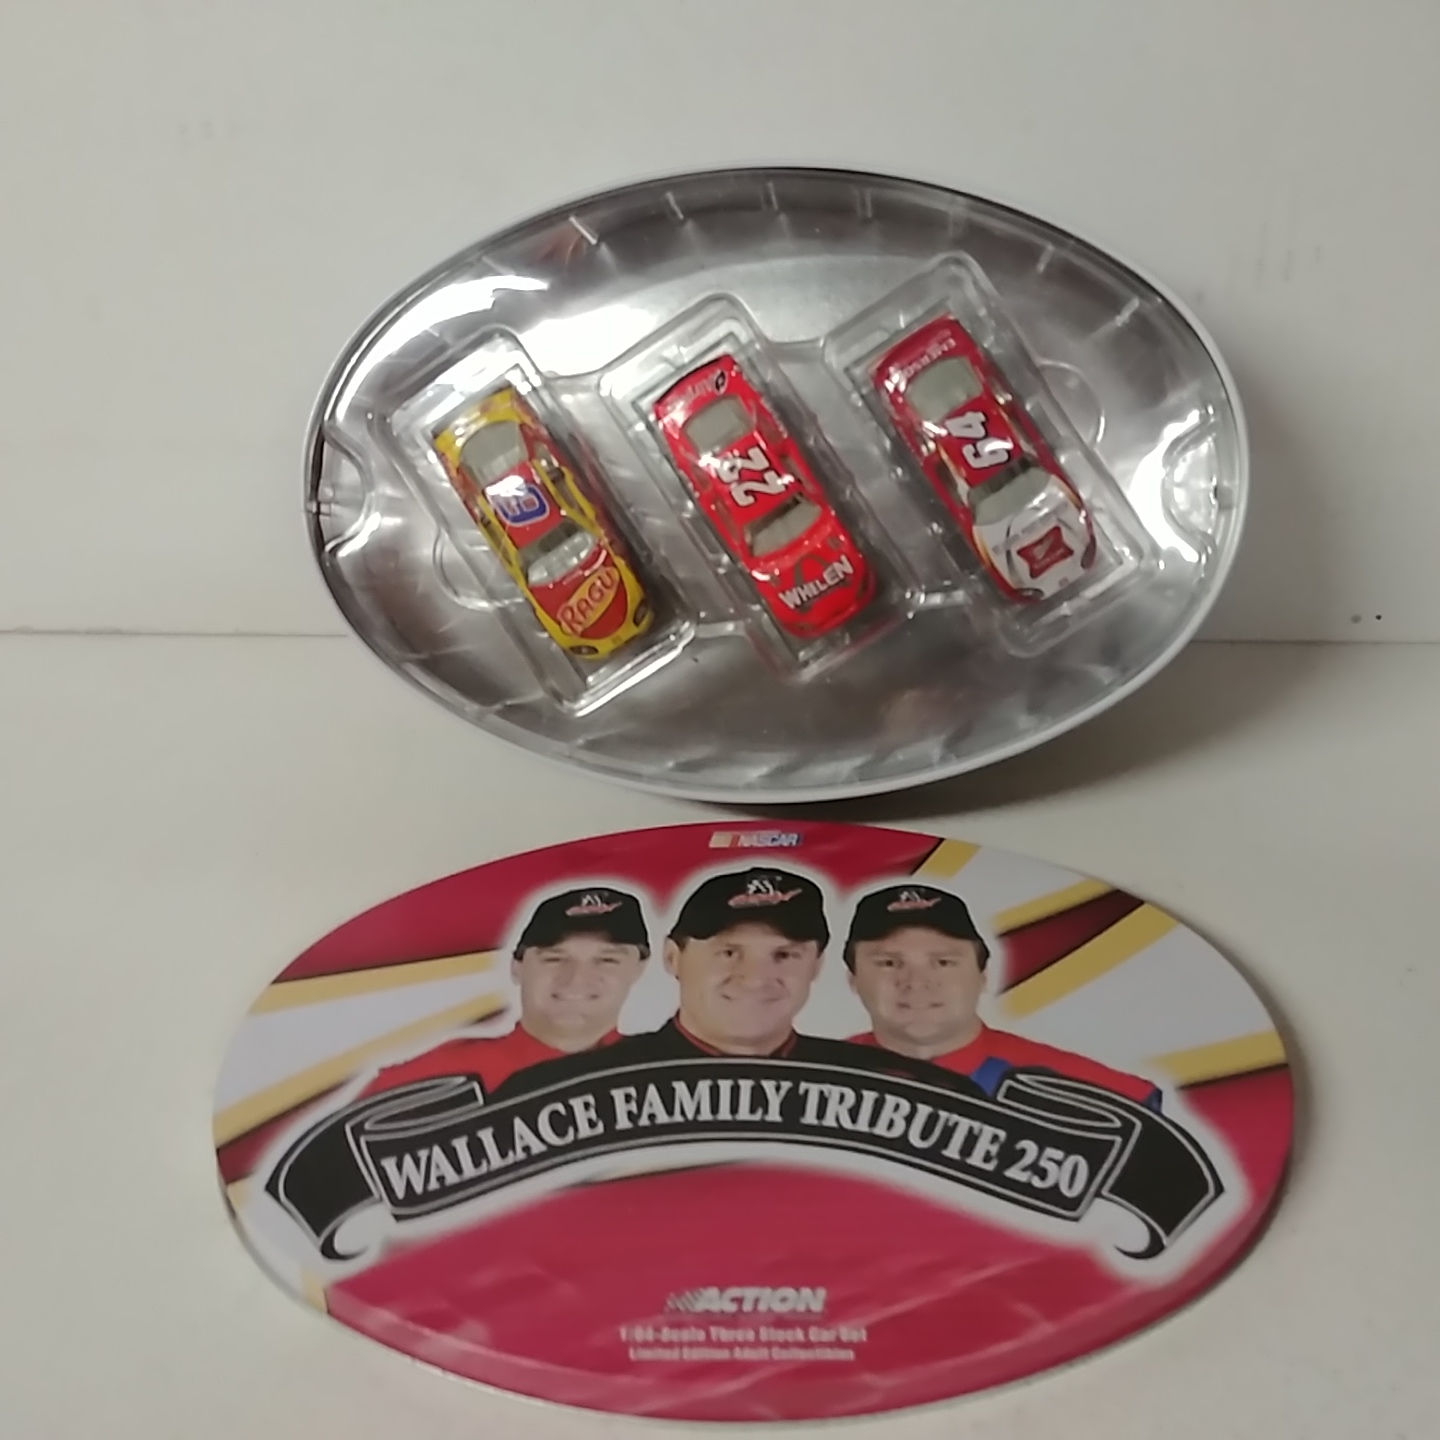 2005 Rusty, Kenny, Mike Wallace 1/64th "Family Tin" Set AP cars